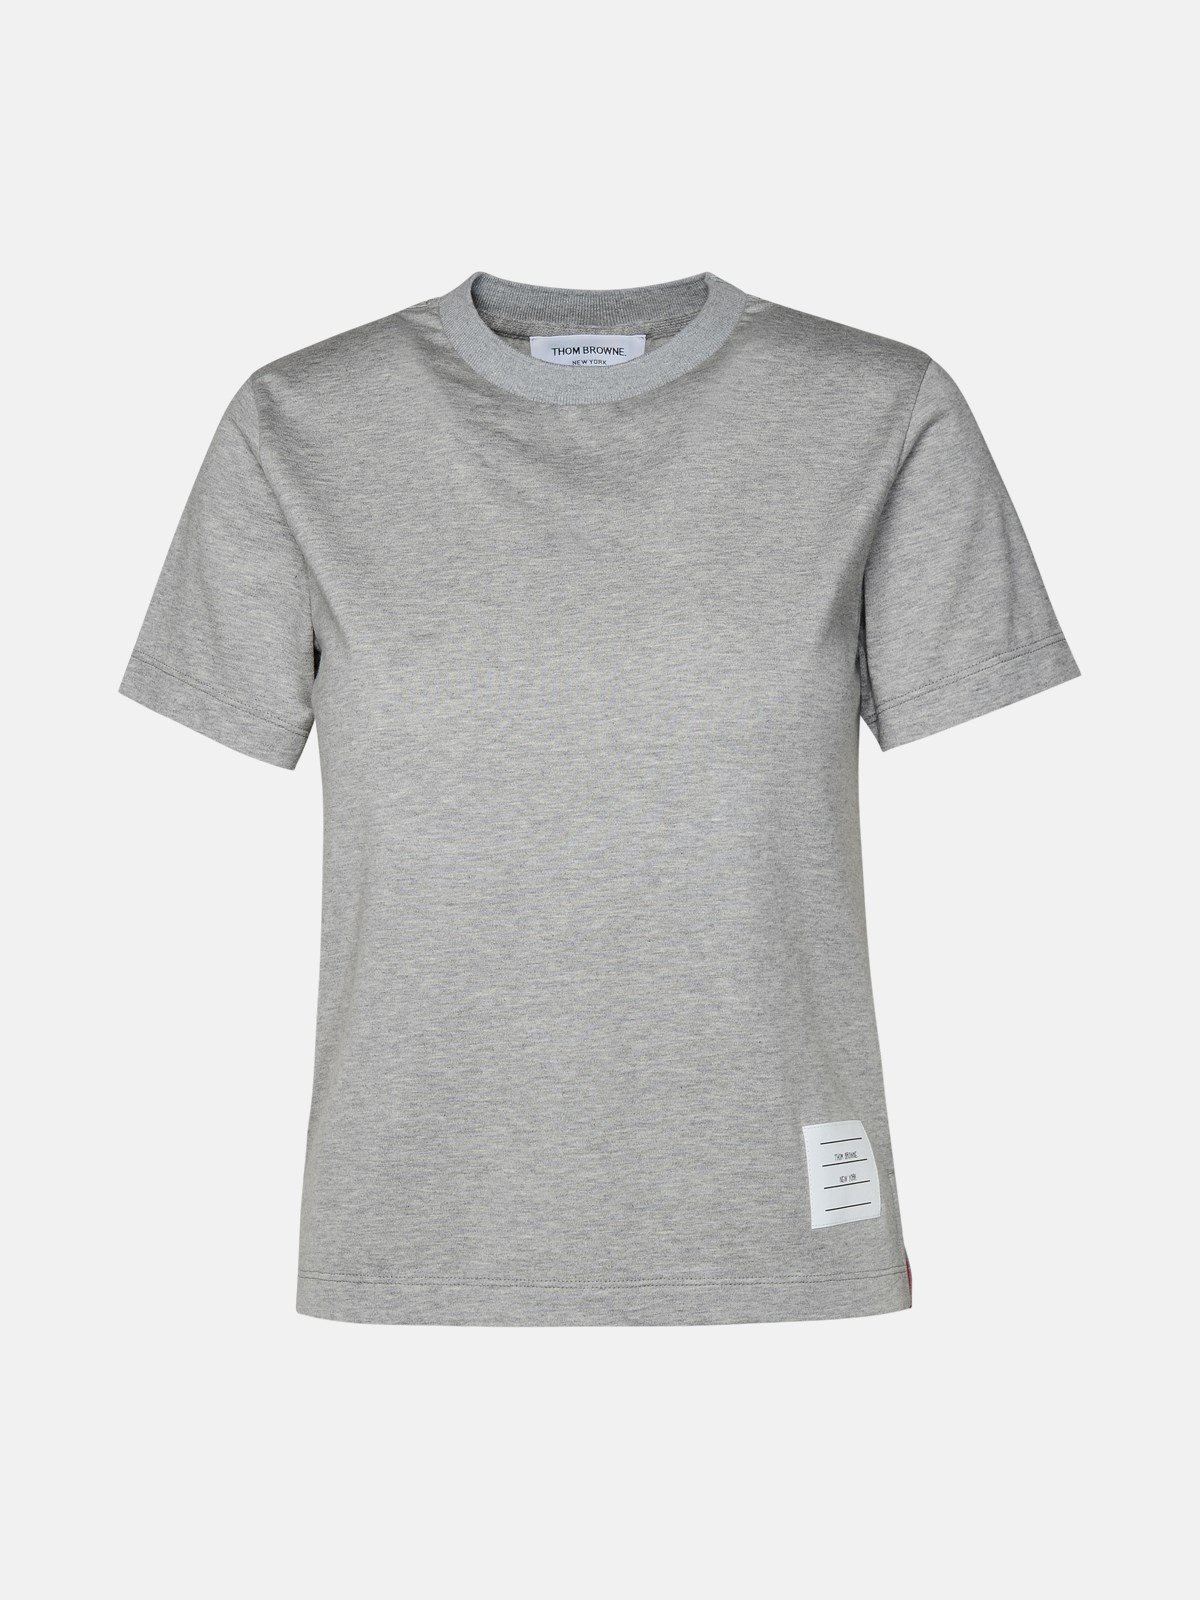 THOM BROWNE 'RELAXED' GREY COTTON T-SHIRT